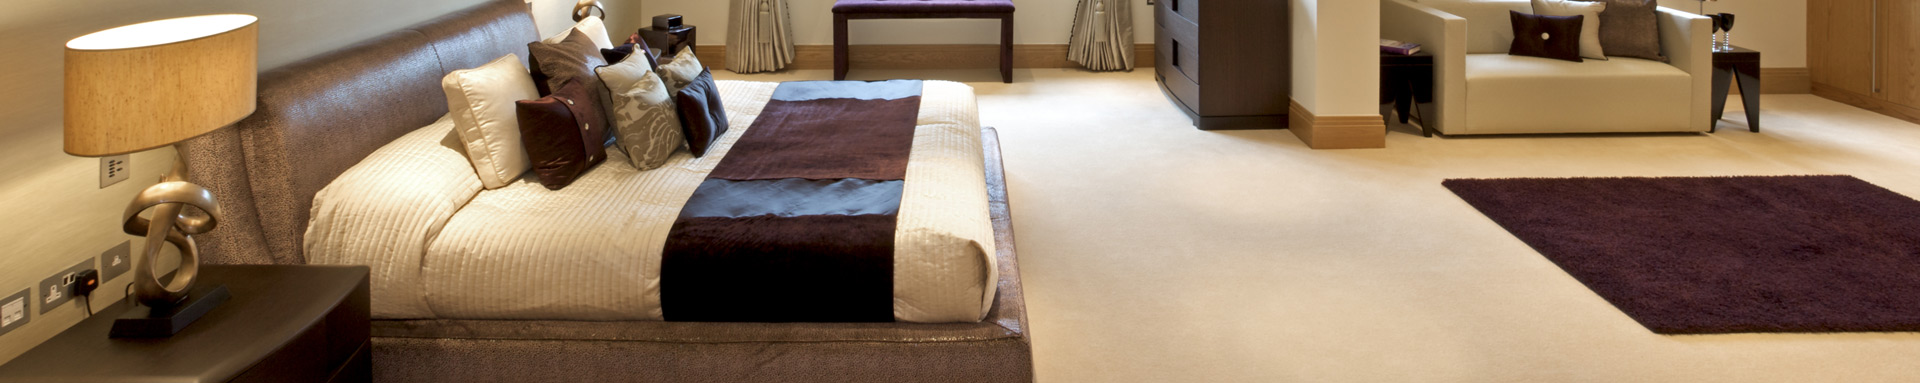 Carpet, Upholstery and Mattress Cleaning | BestPro Cleaning